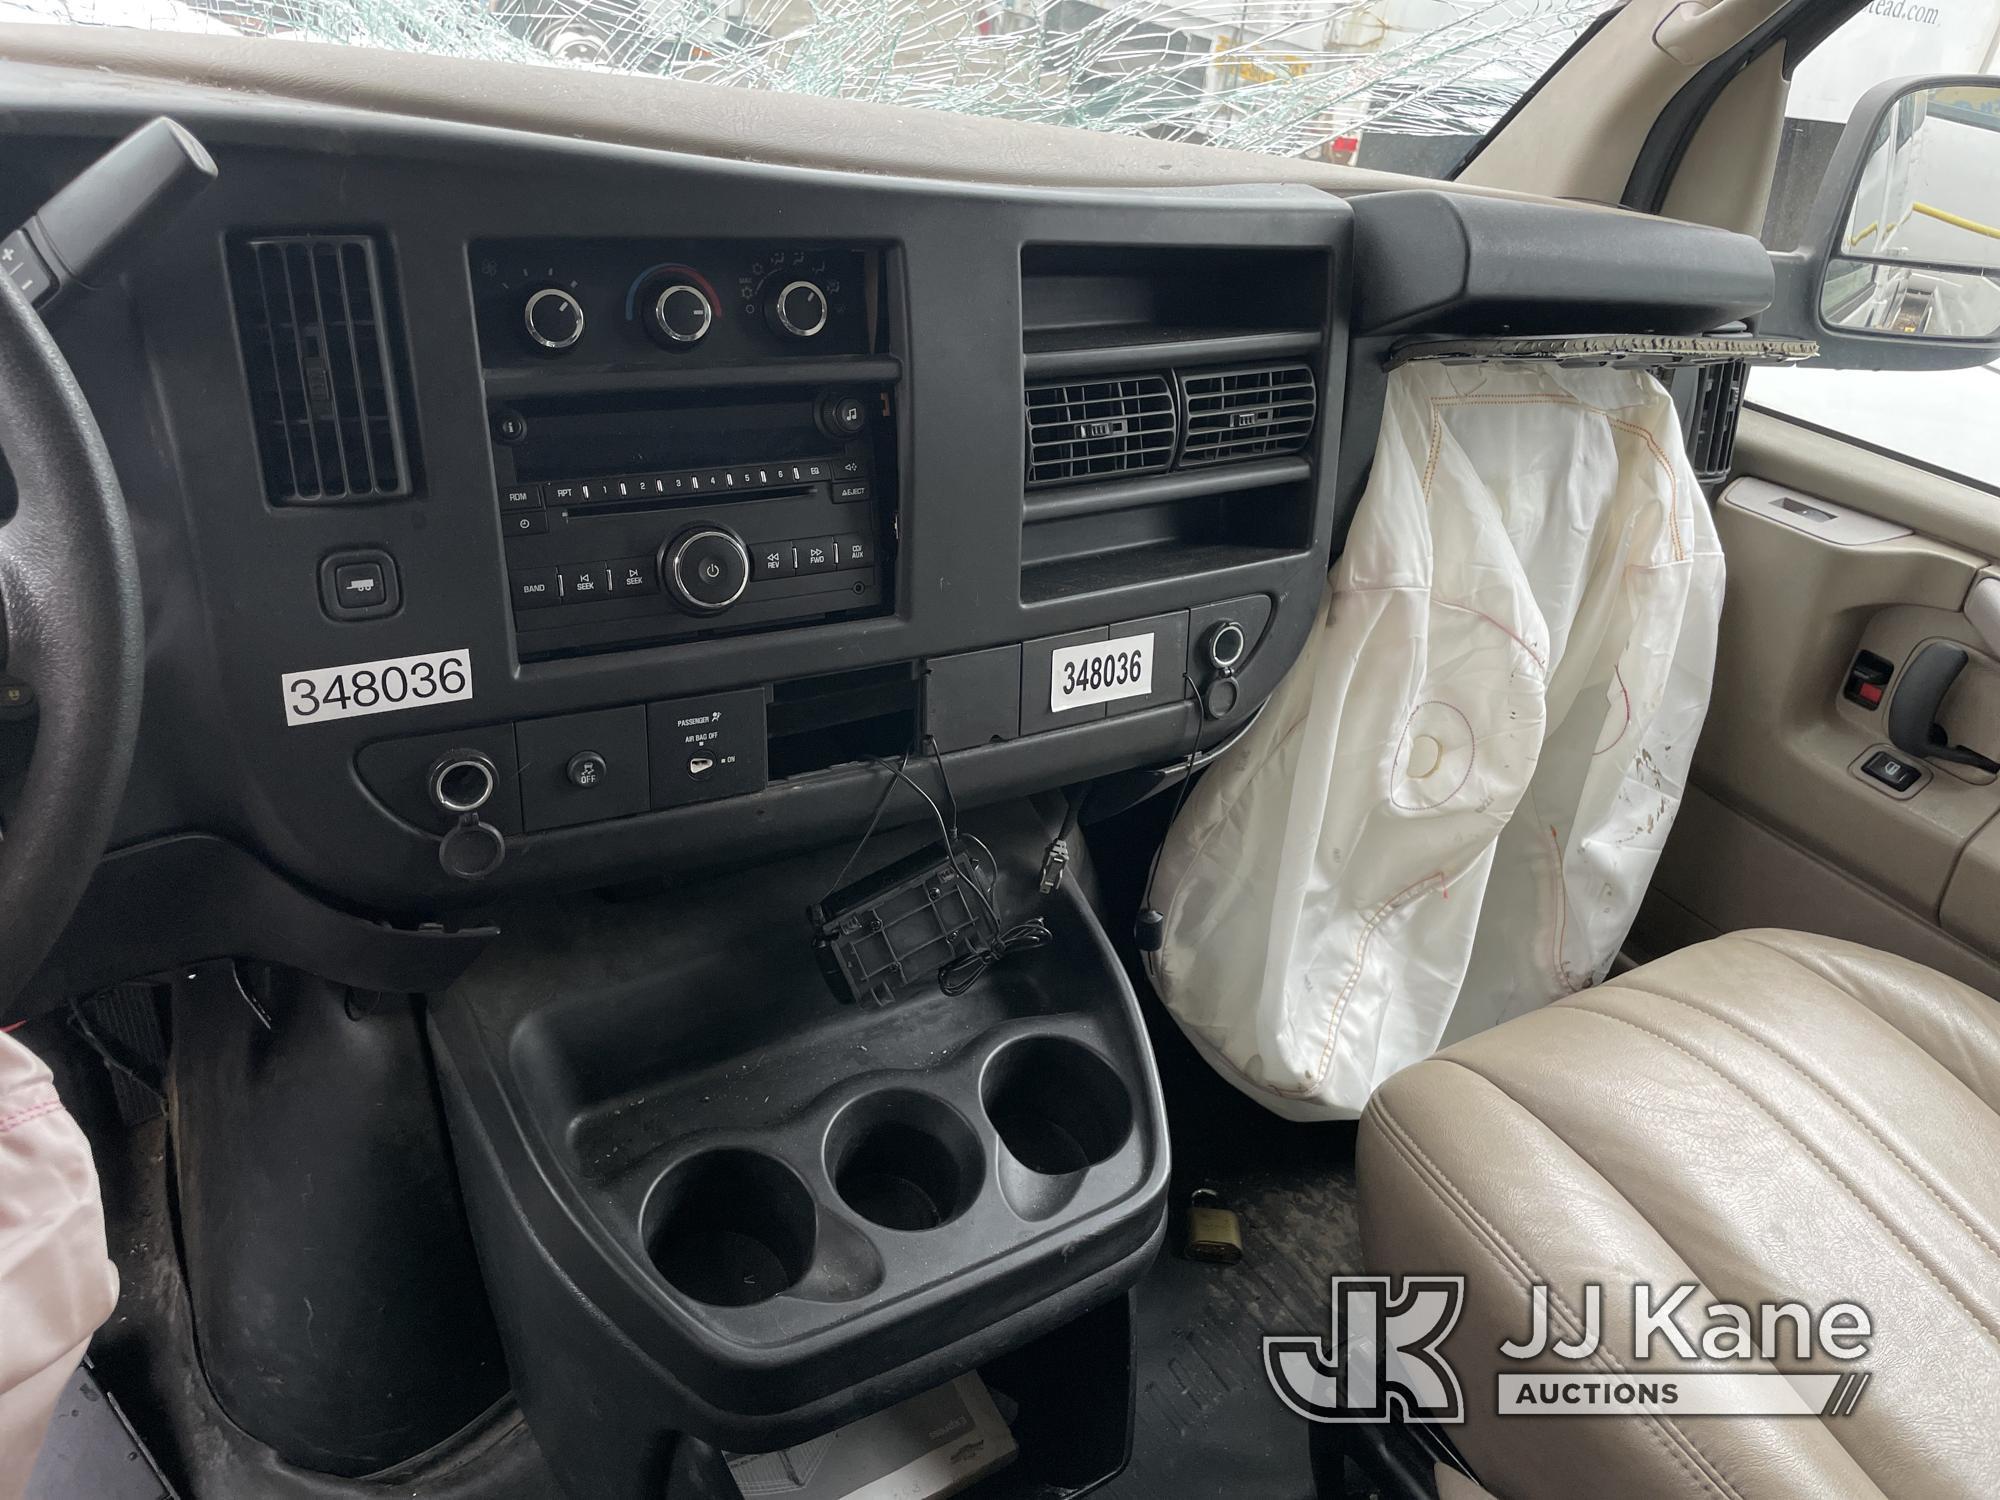 (Plymouth Meeting, PA) 2013 Chevrolet Express G3500 Cargo Van Wrecked Air Bags Deployed, Not Running